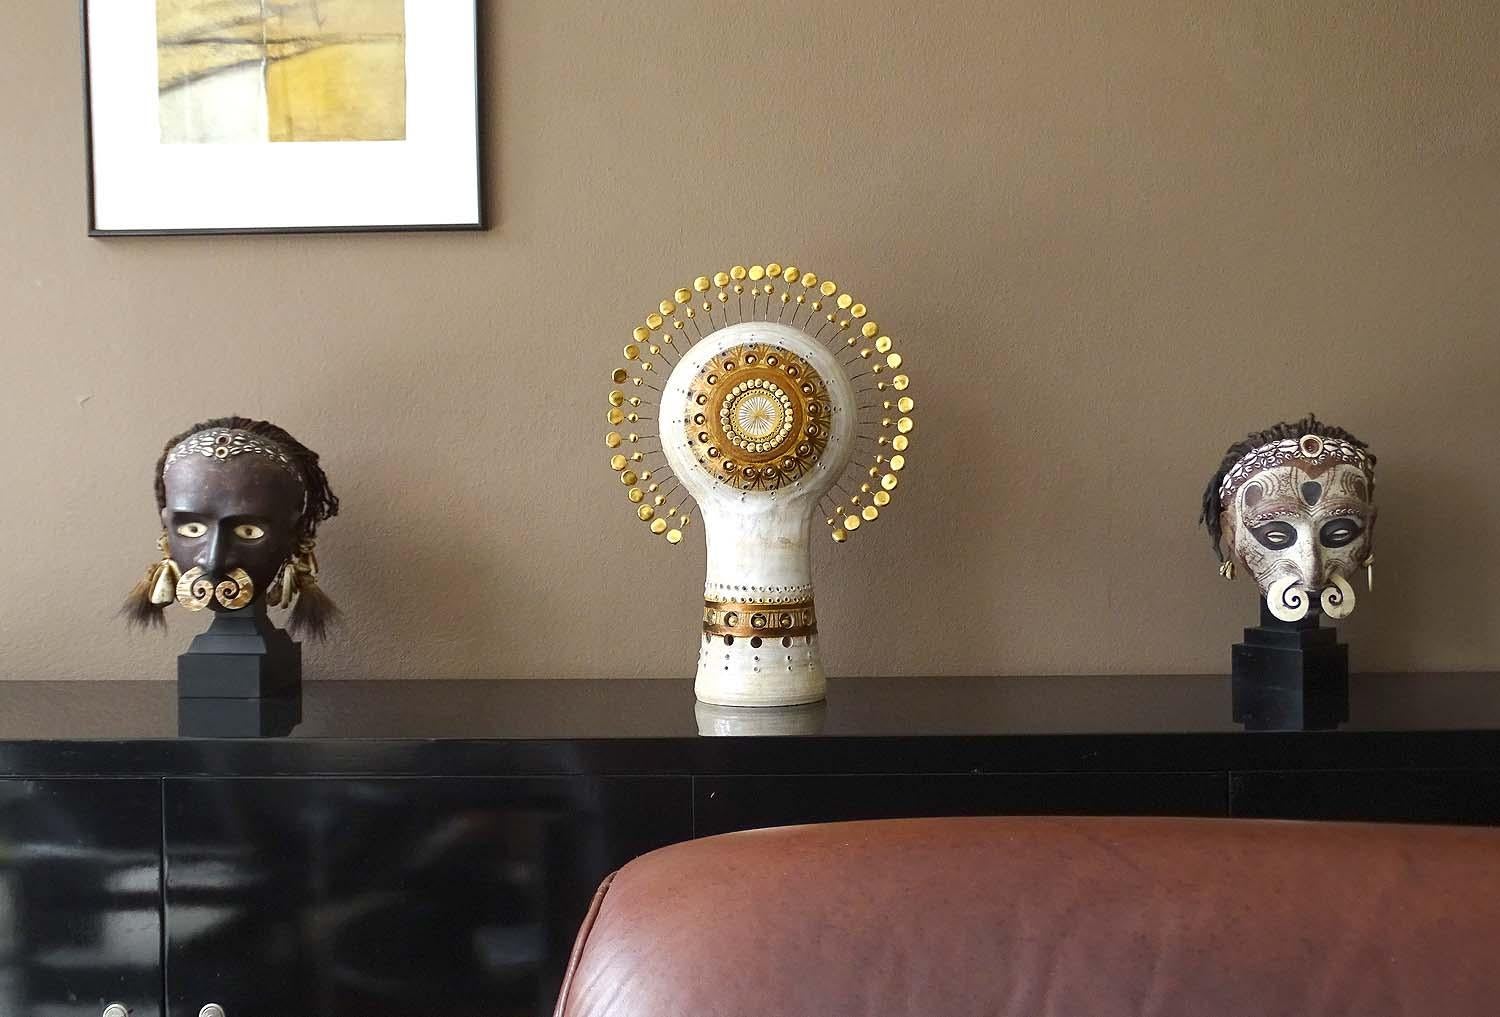 Spectacular handcrafted French midcentury ceramic and clay TOTEM table lamp, circa 1970 by sculptor Georges Pelletier, cream white glazed body punctuated with gold spheres in lower section, sunburst crown with two level gold enameled clay stones,